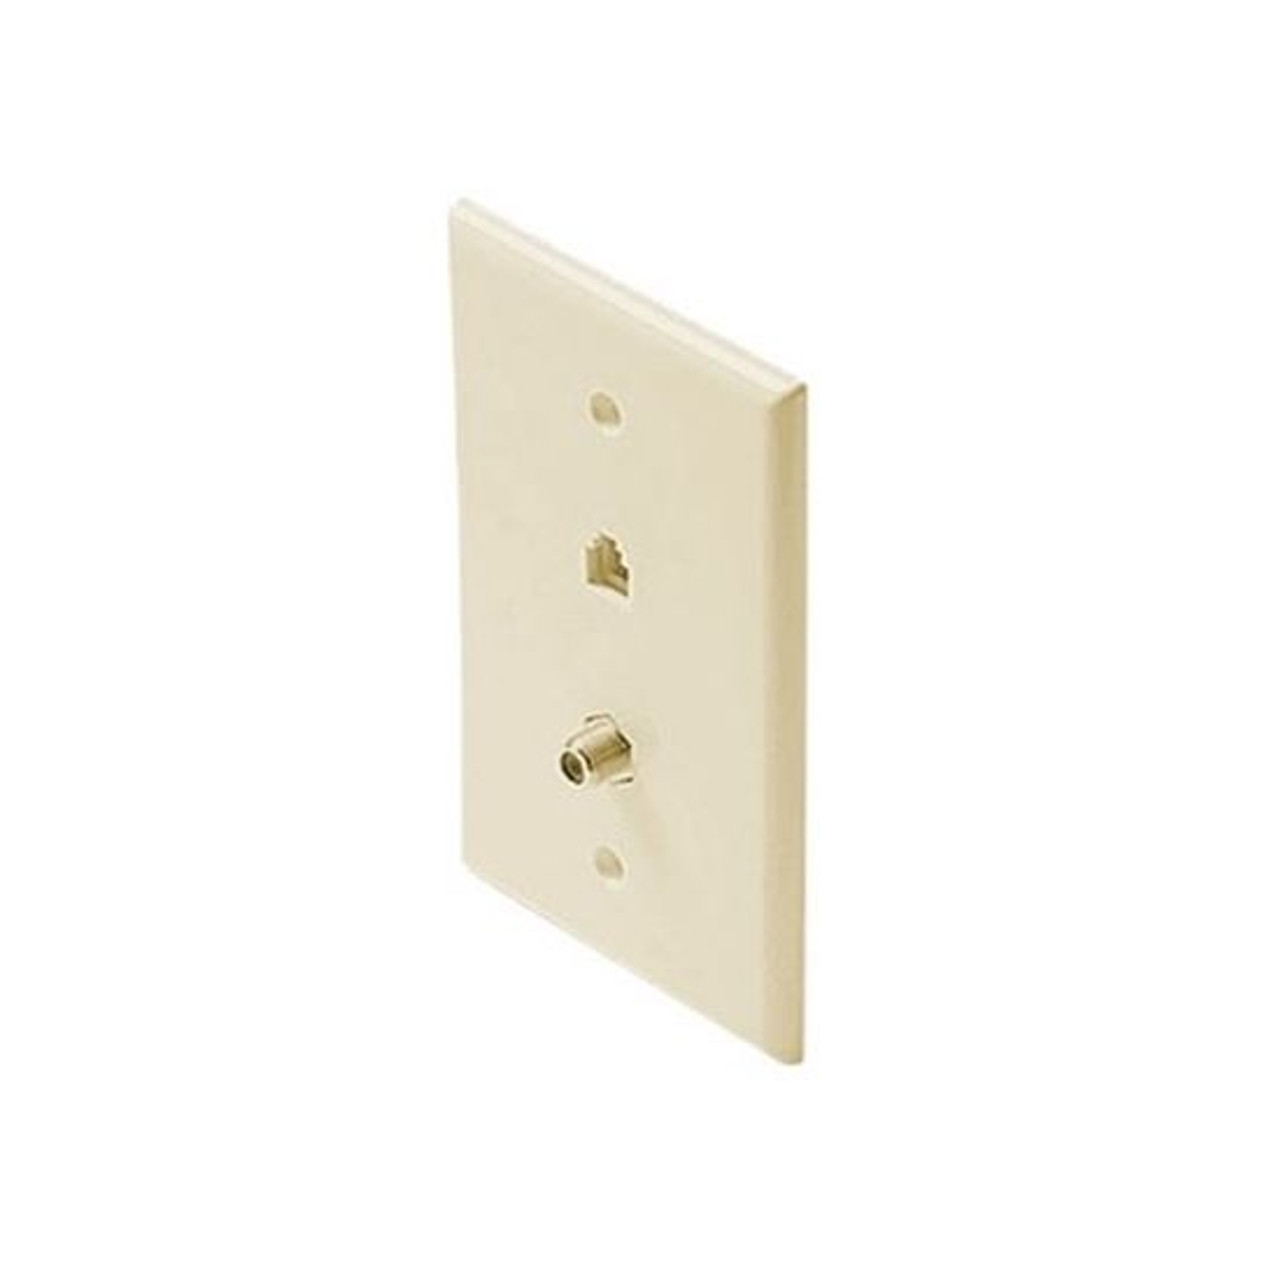 Eagle Wall Plate Phone F Jack Ivory RJ11 Modular F-81 Telephone Coaxial Flush Mount Coax Combo Telephone Gold Connector Combination for TV Signal